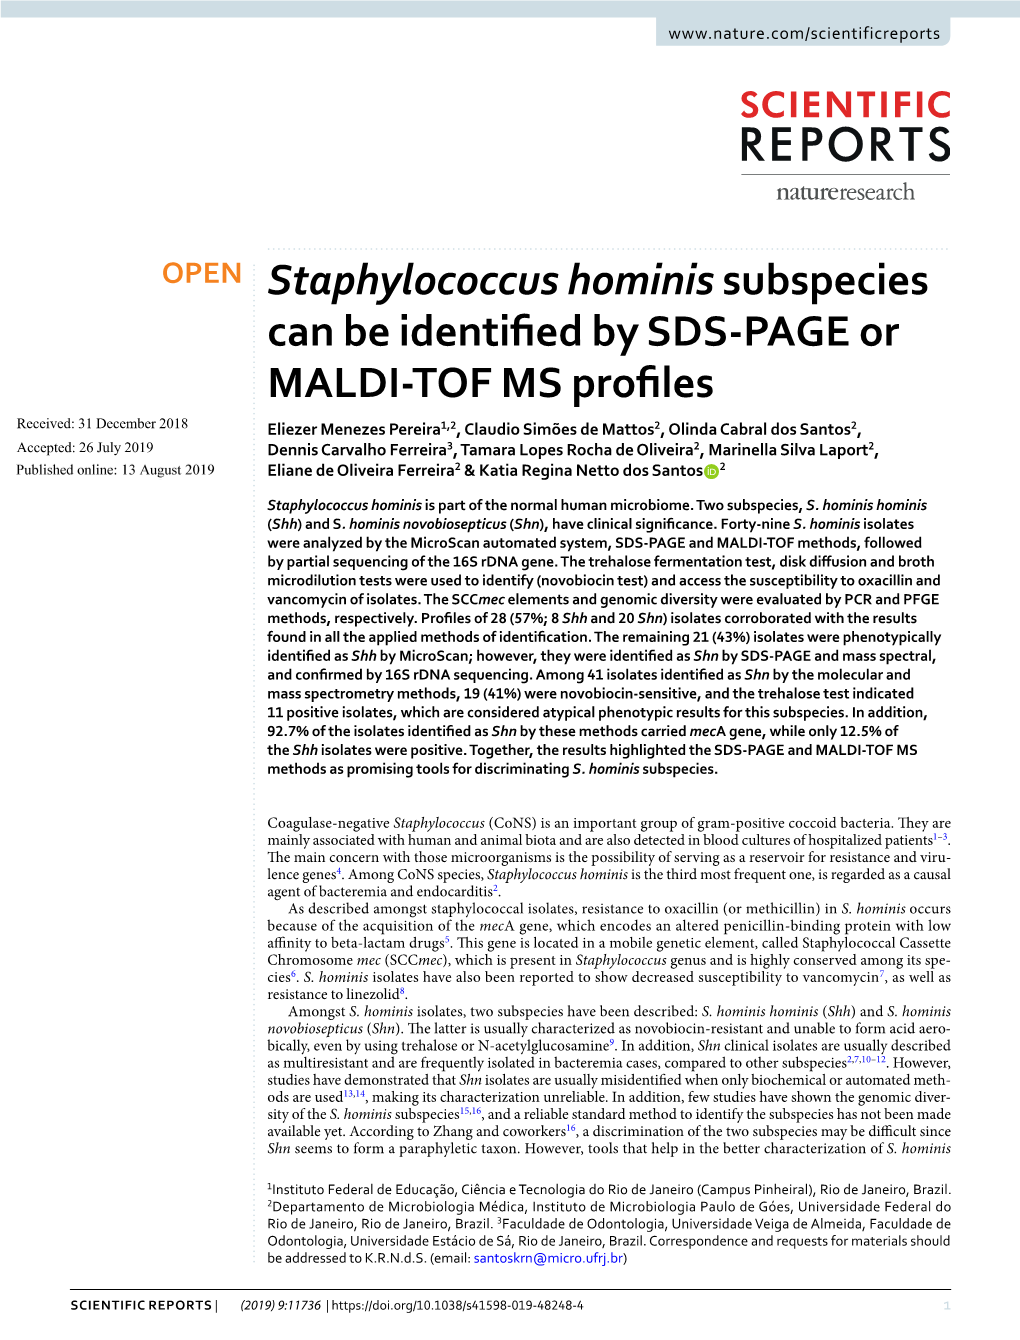 Staphylococcus Hominis Subspecies Can Be Identified by SDS-PAGE Or MALDI-TOF MS Profiles